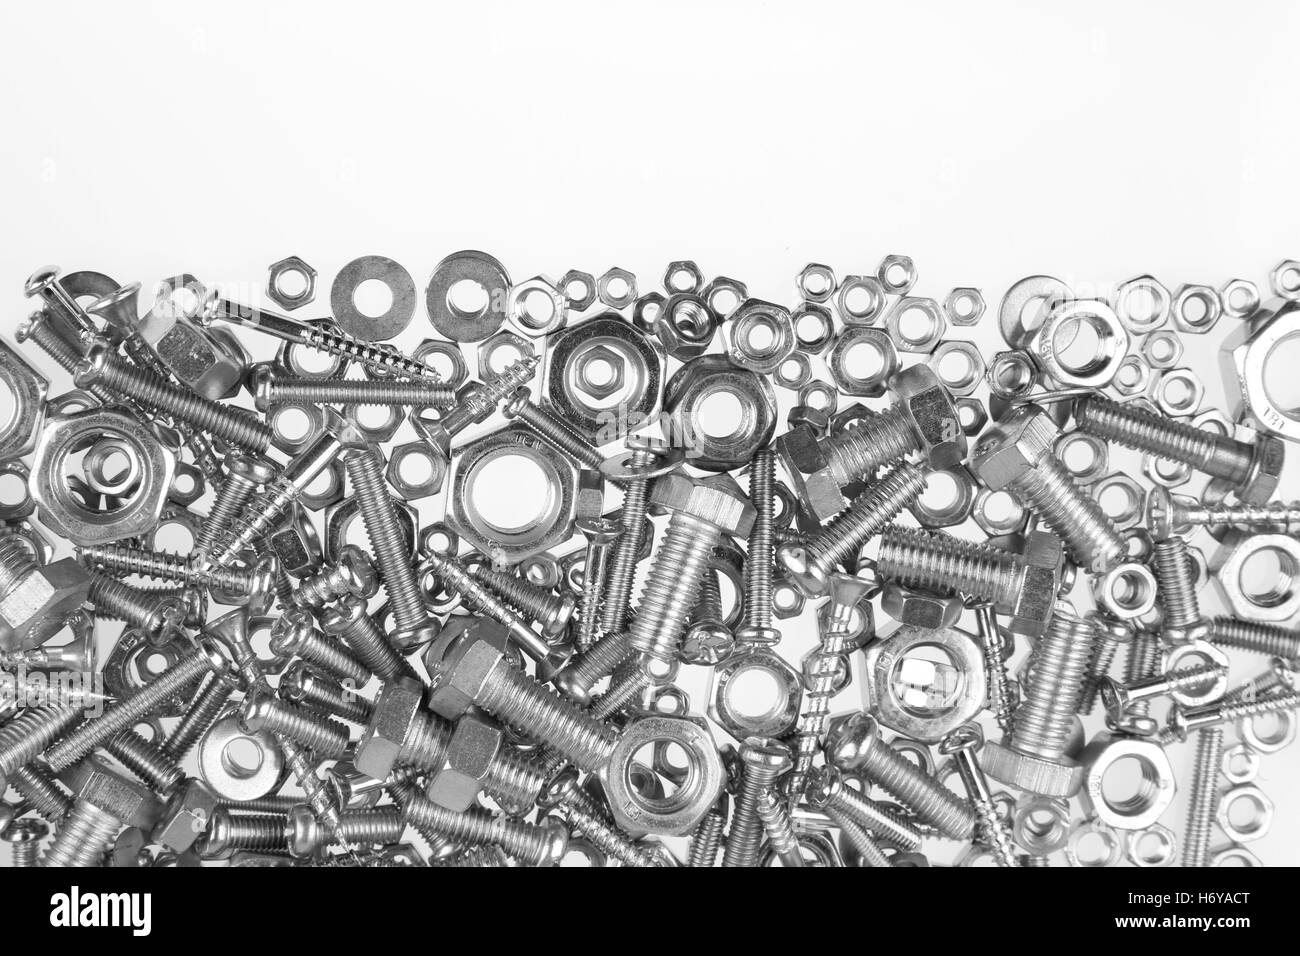 Chrome nuts and bolts closeup Stock Photo